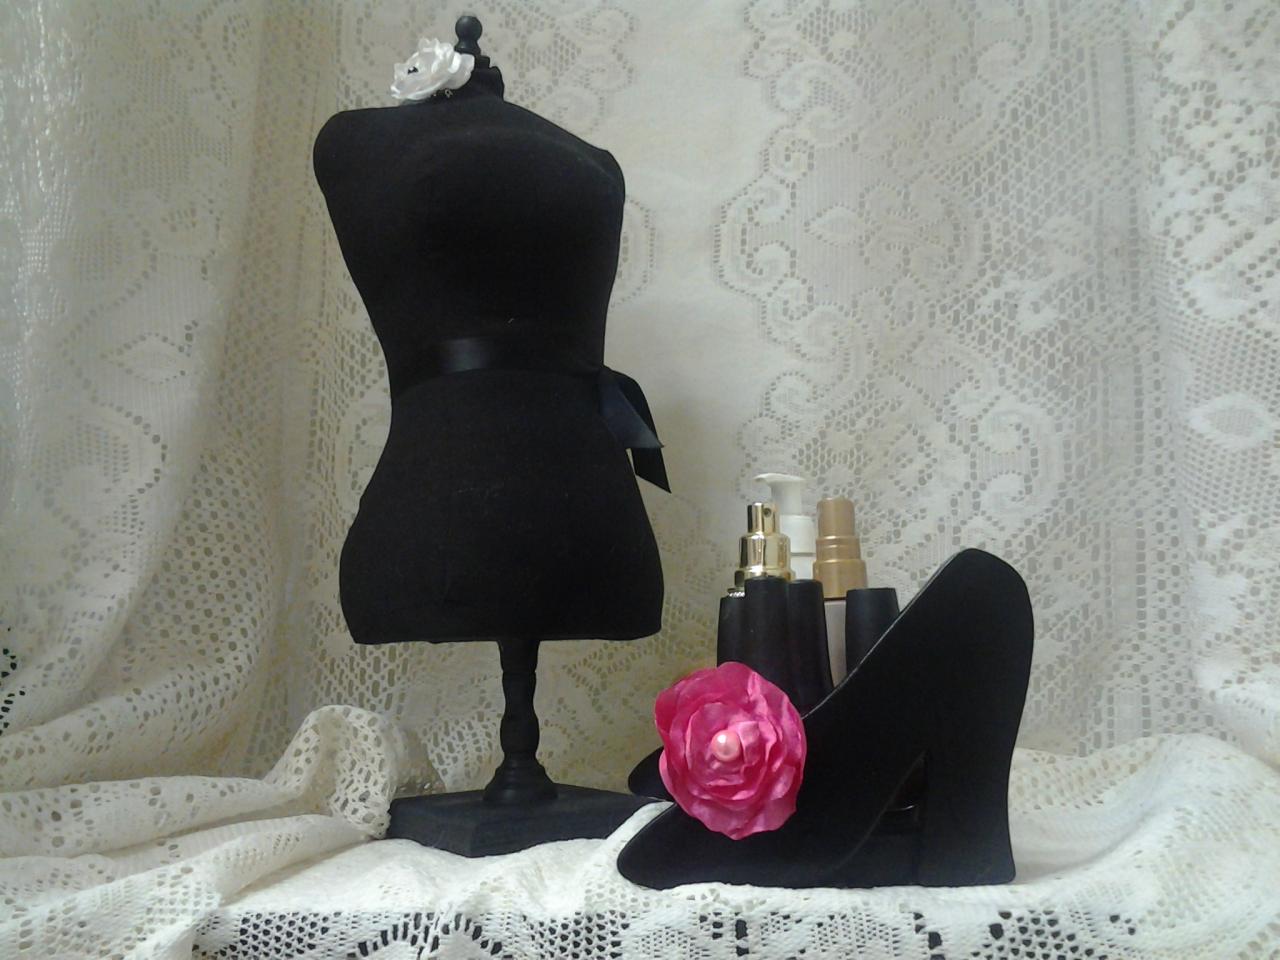 Boutique Shoe Organizer High Heels, Great On A Vanity To Hold Nail Polish, Perfume, Make Up Organizer, Earring Holder.